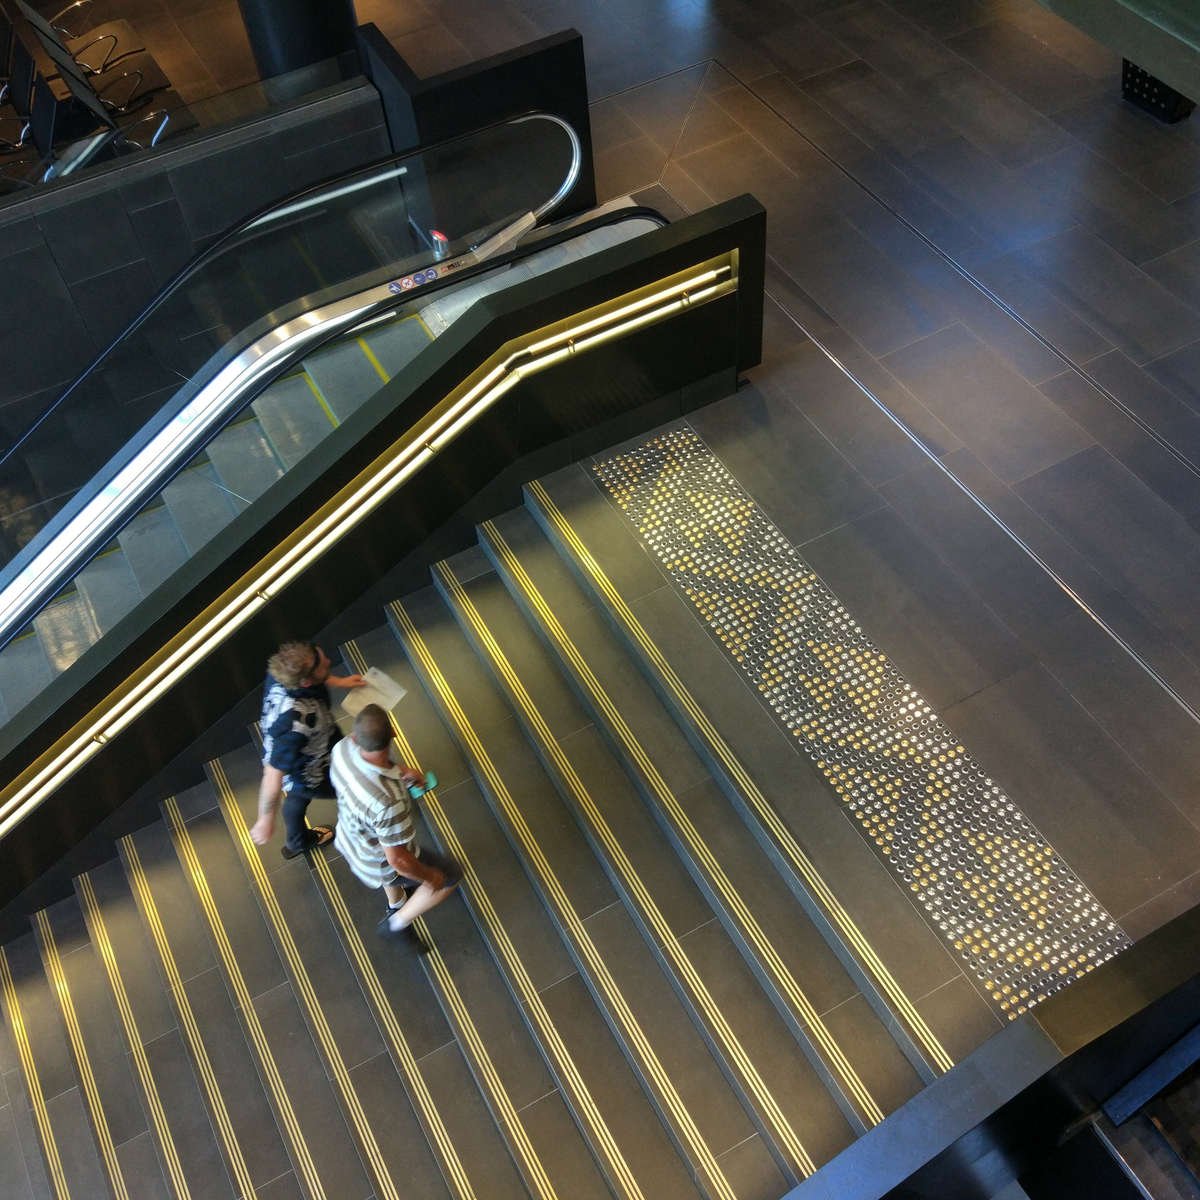 Distance photo with people walking on TacPro brass, stainless steel, and stainless steel with black carborundum arranged in a pattern at the top of stairs